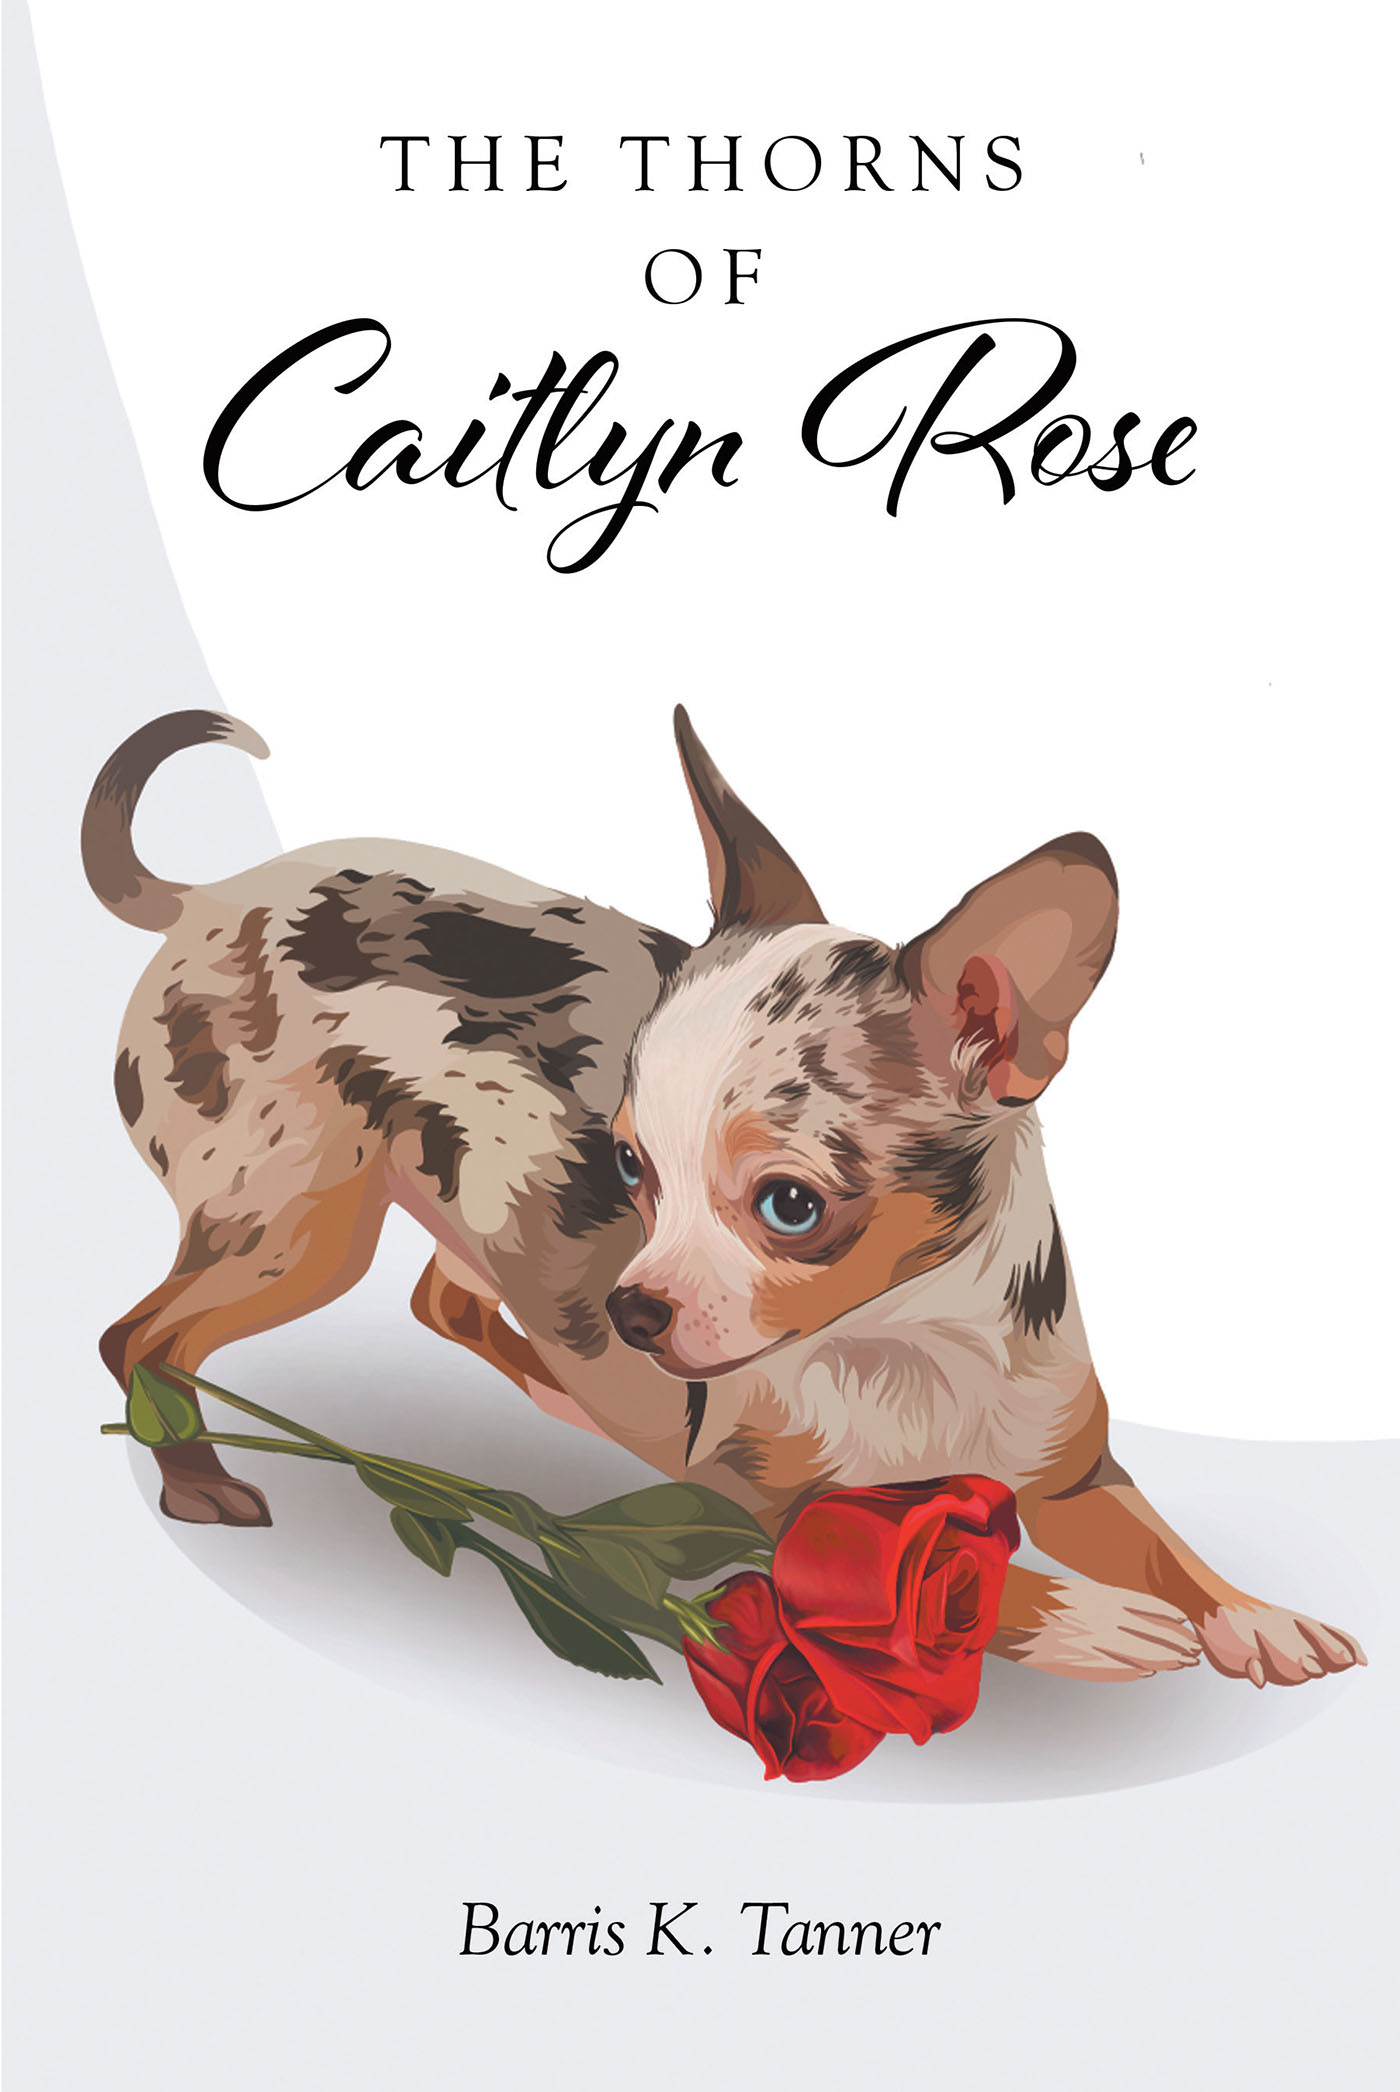 Barris K. Tanner’s New Book, "The Thorns of Caitlyn Rose," is a Moving Tale of One Woman's Journey Through Life, from Trying Childhood Circumstances to a Hurtful Betrayal